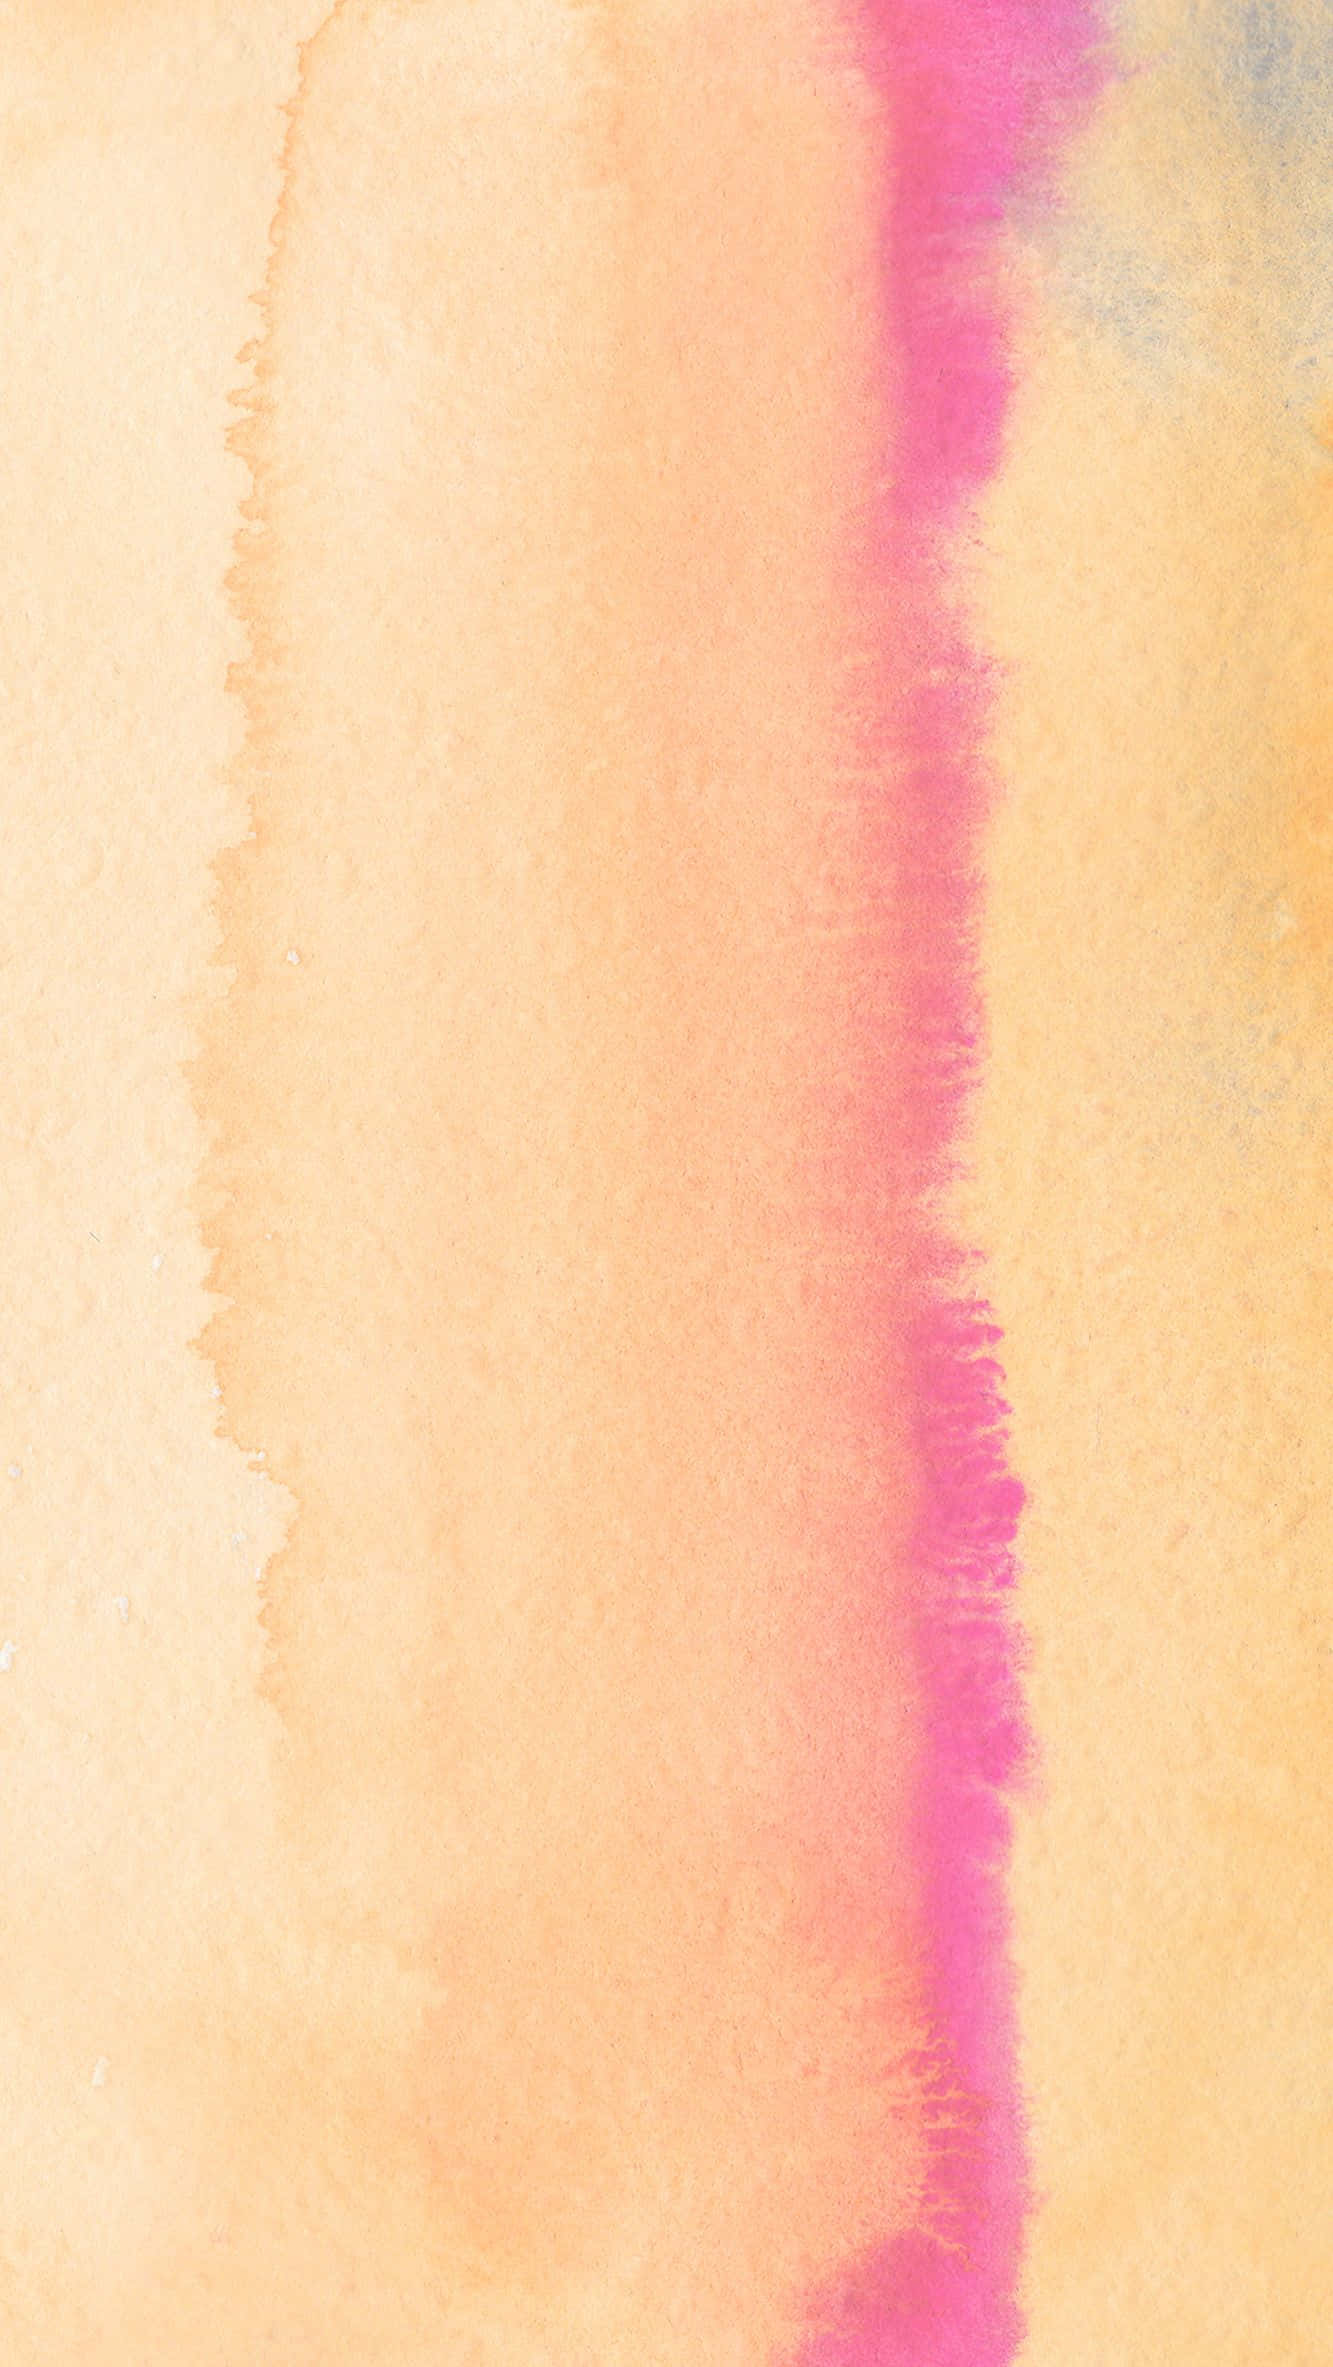 Mellow Shades of Peach for your iPhone Wallpaper